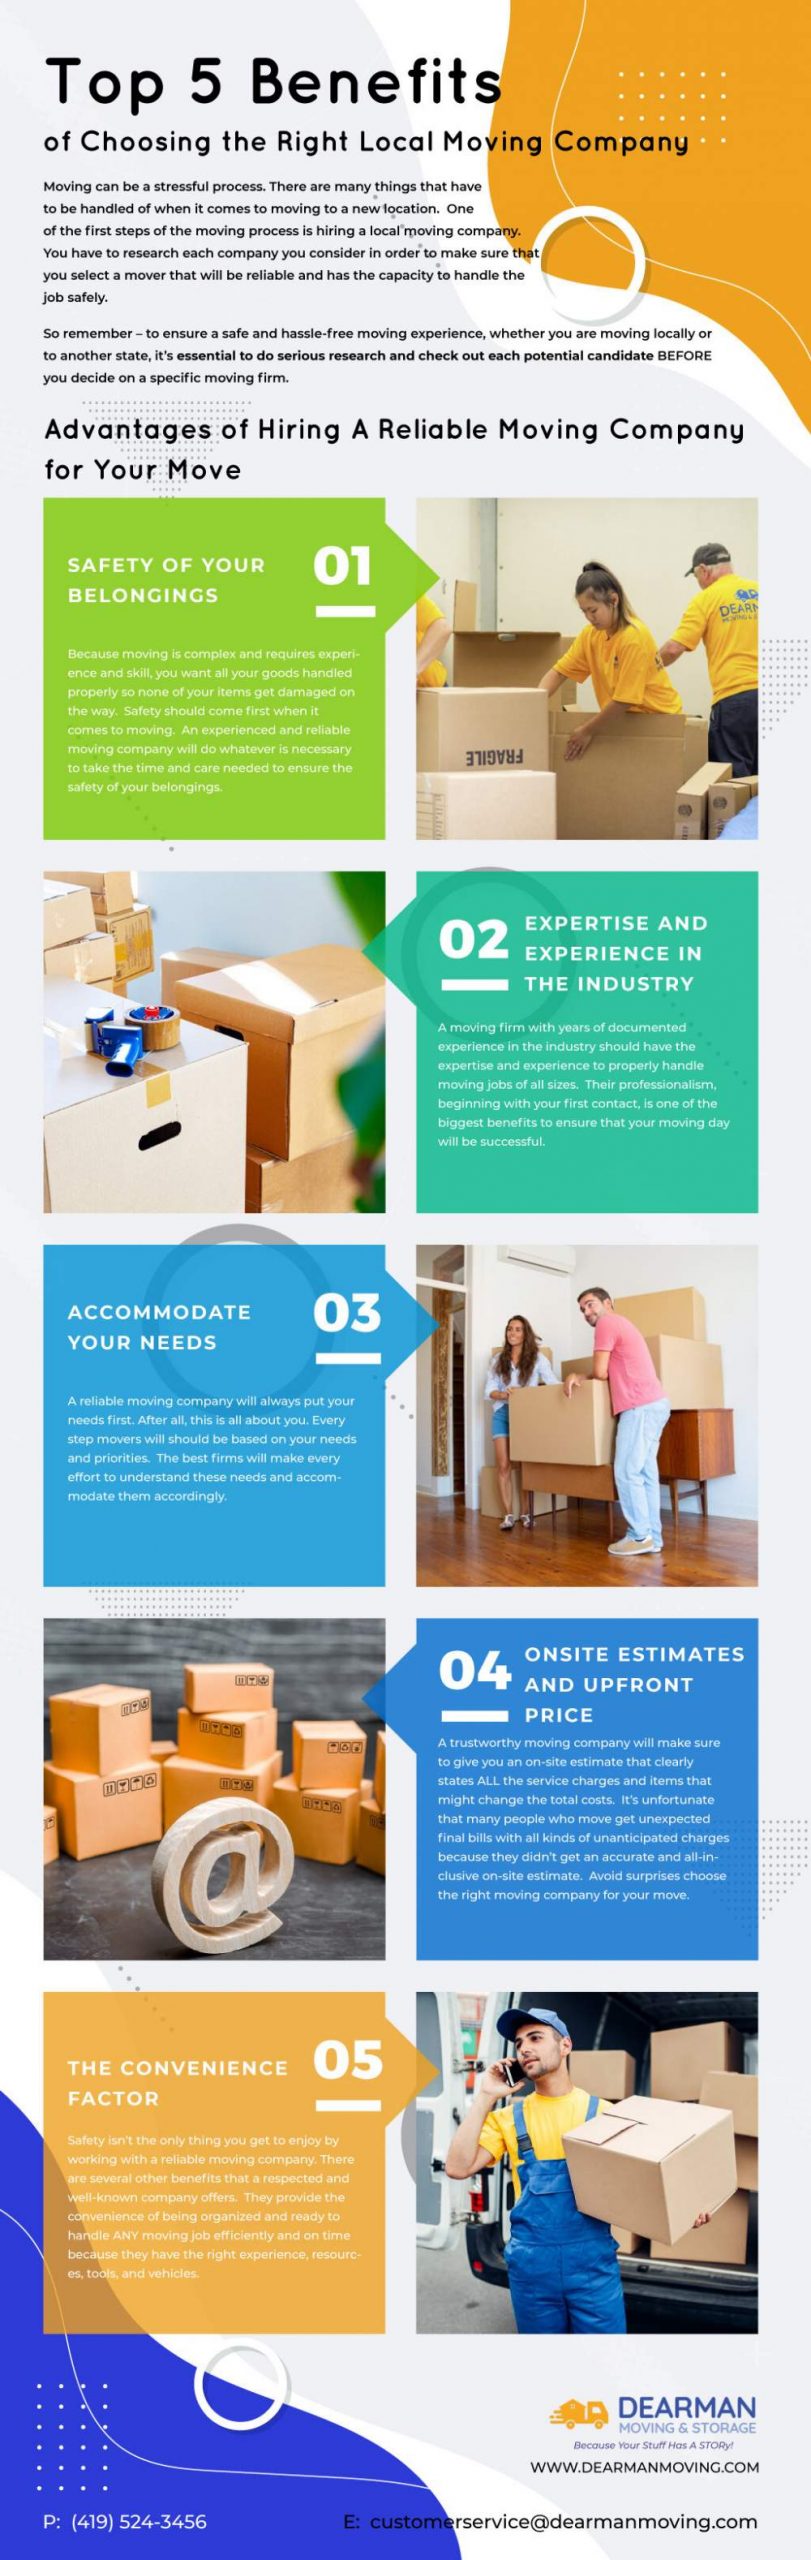 Benefits of Choosing the Right Local Moving Company